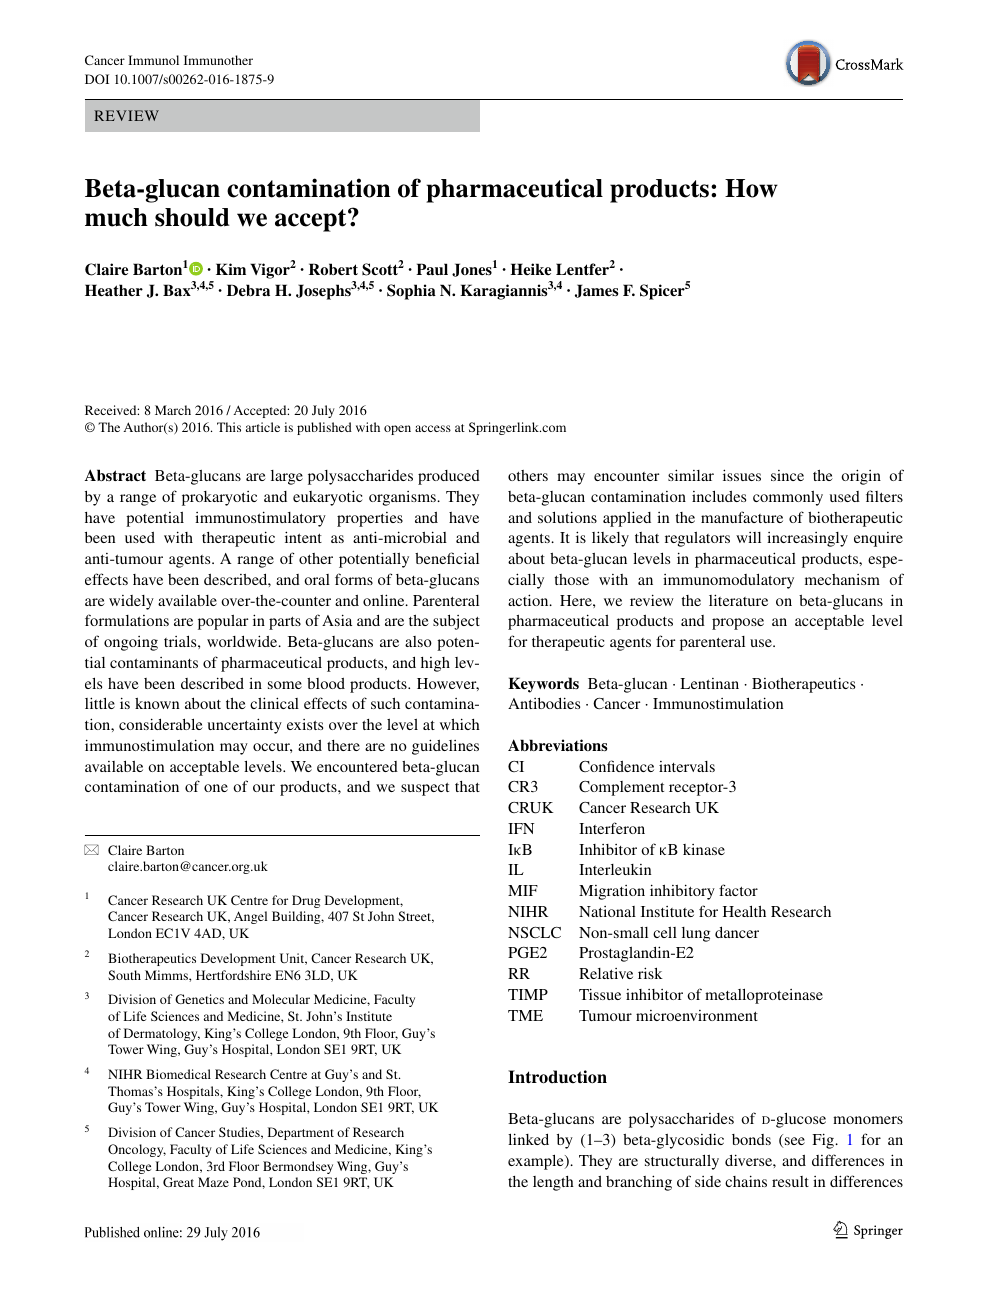 Beta Glucan Contamination Of Pharmaceutical Products How Much Should We Accept Topic Of Research Paper In Clinical Medicine Download Scholarly Article Pdf And Read For Free On Cyberleninka Open Science Hub